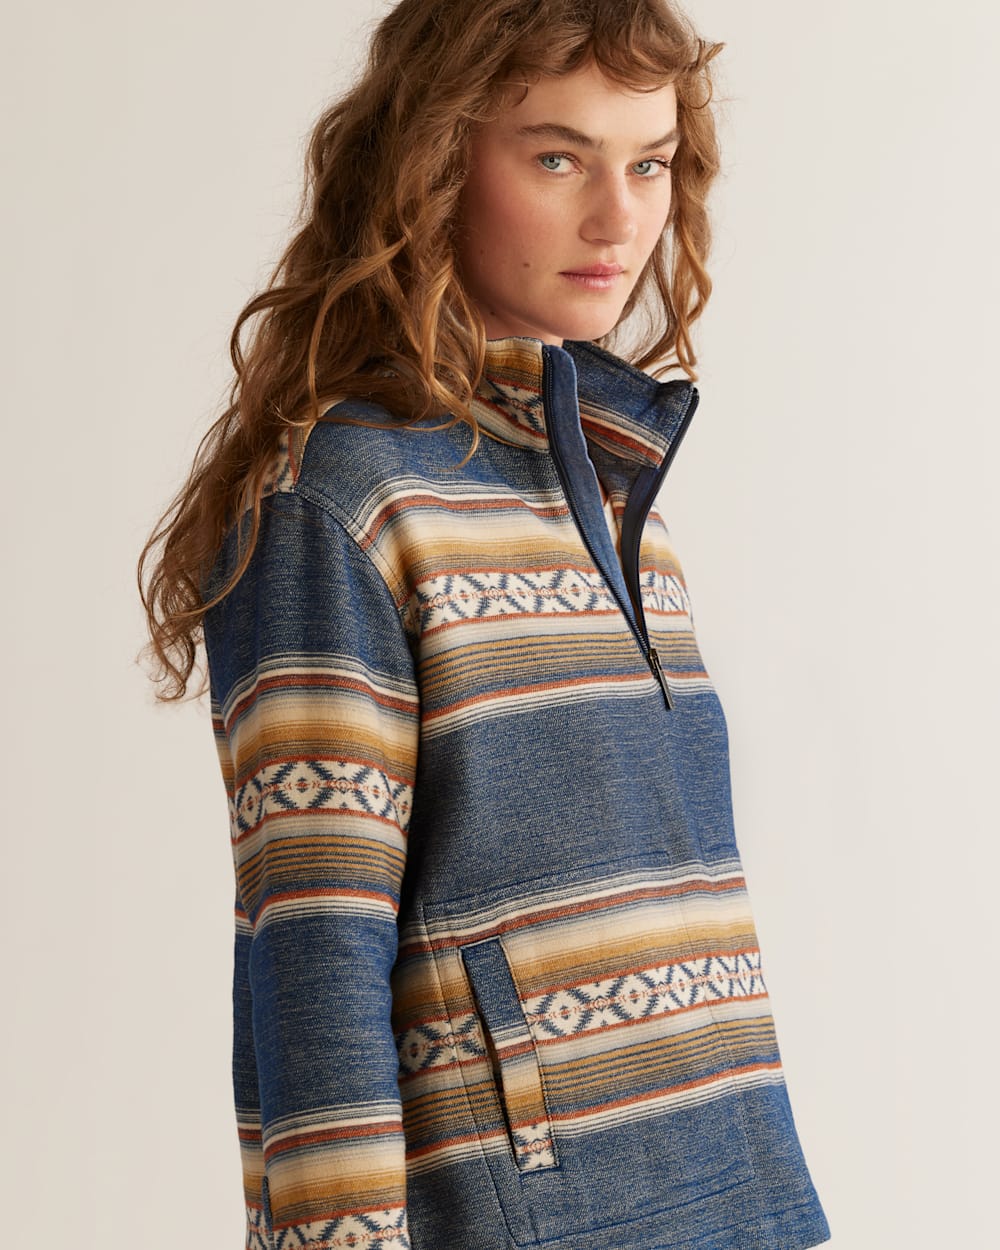 ALTERNATE VIEW OF WOMEN'S DOUBLESOFT HALF-ZIP PULLOVER IN BLUE MULTI image number 4